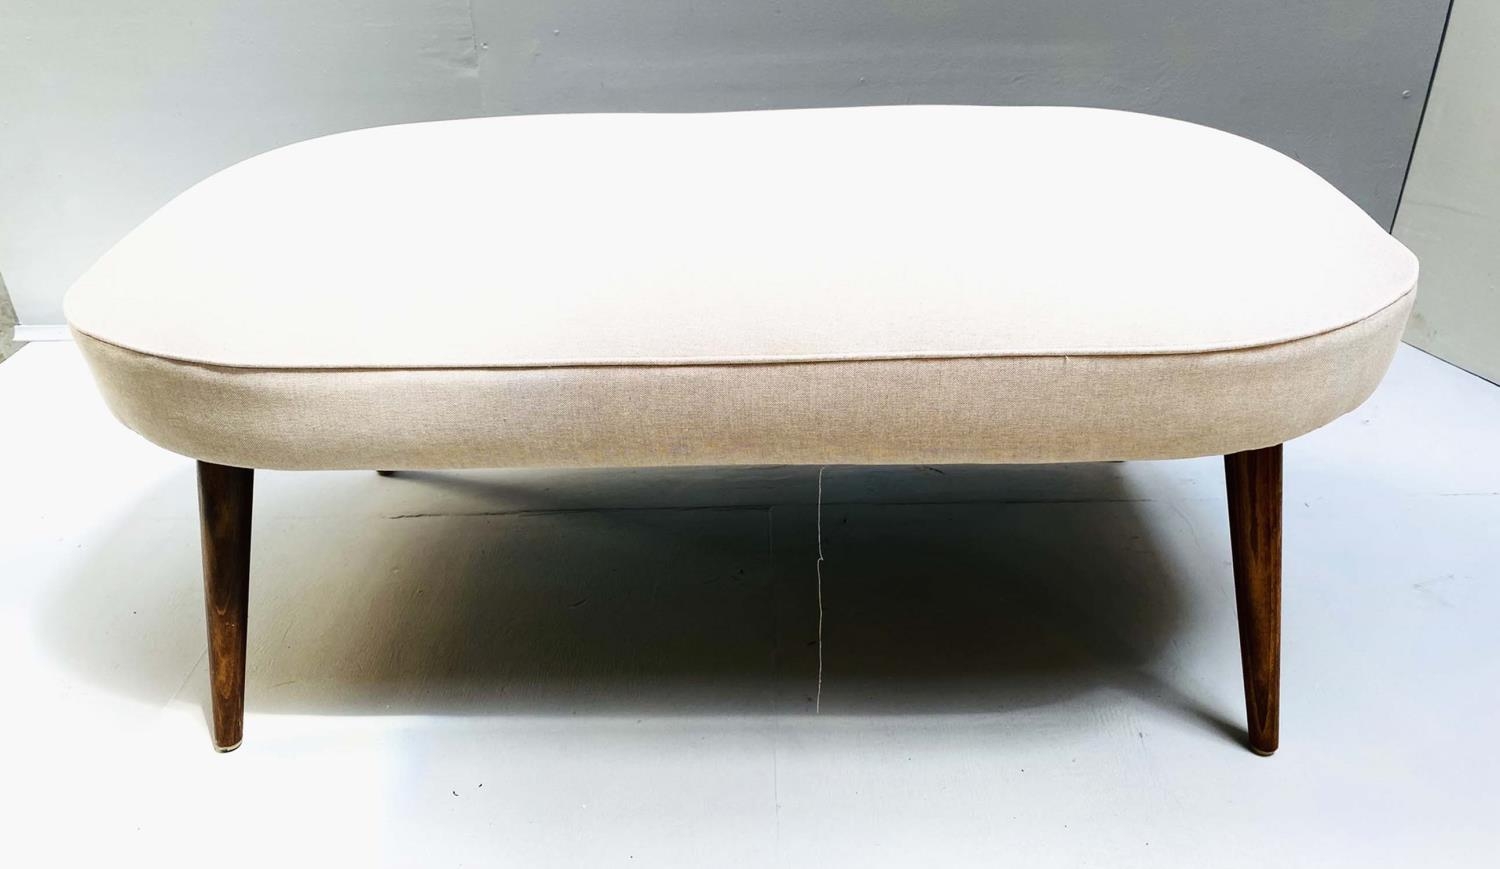 FOOTSTOOL, 46cm H x 106cm W x 54cm D, 1950s Italian style, neutral upholstery. - Image 2 of 4